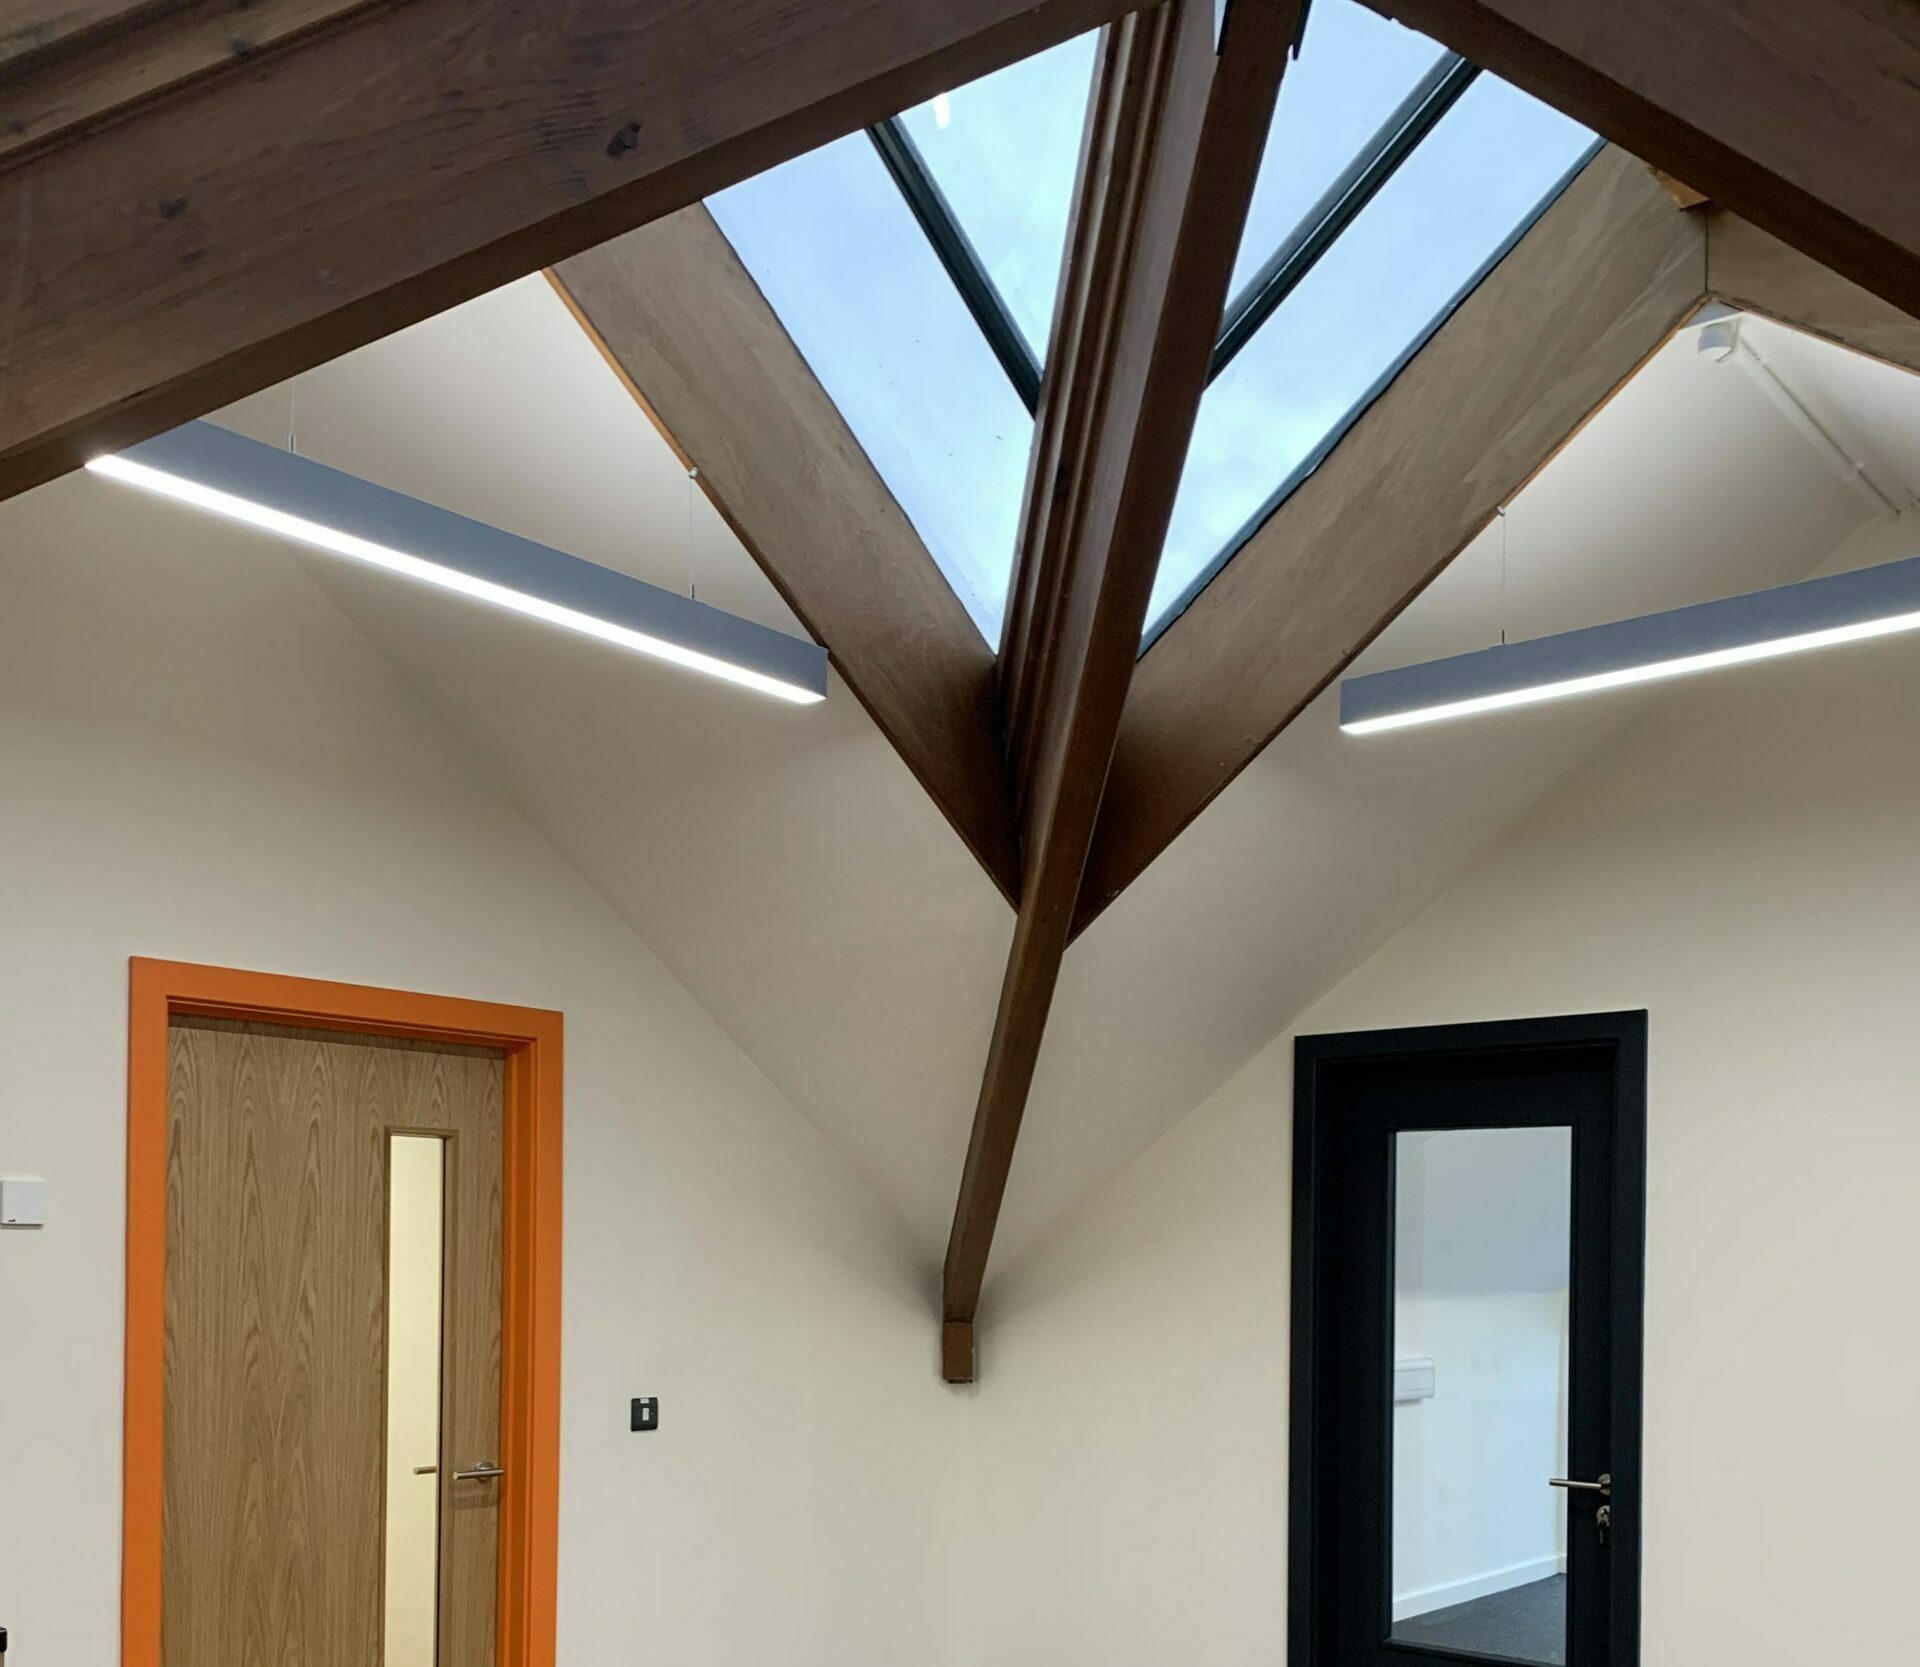 The interior of Glebe House surgery, showing beams and a skylight